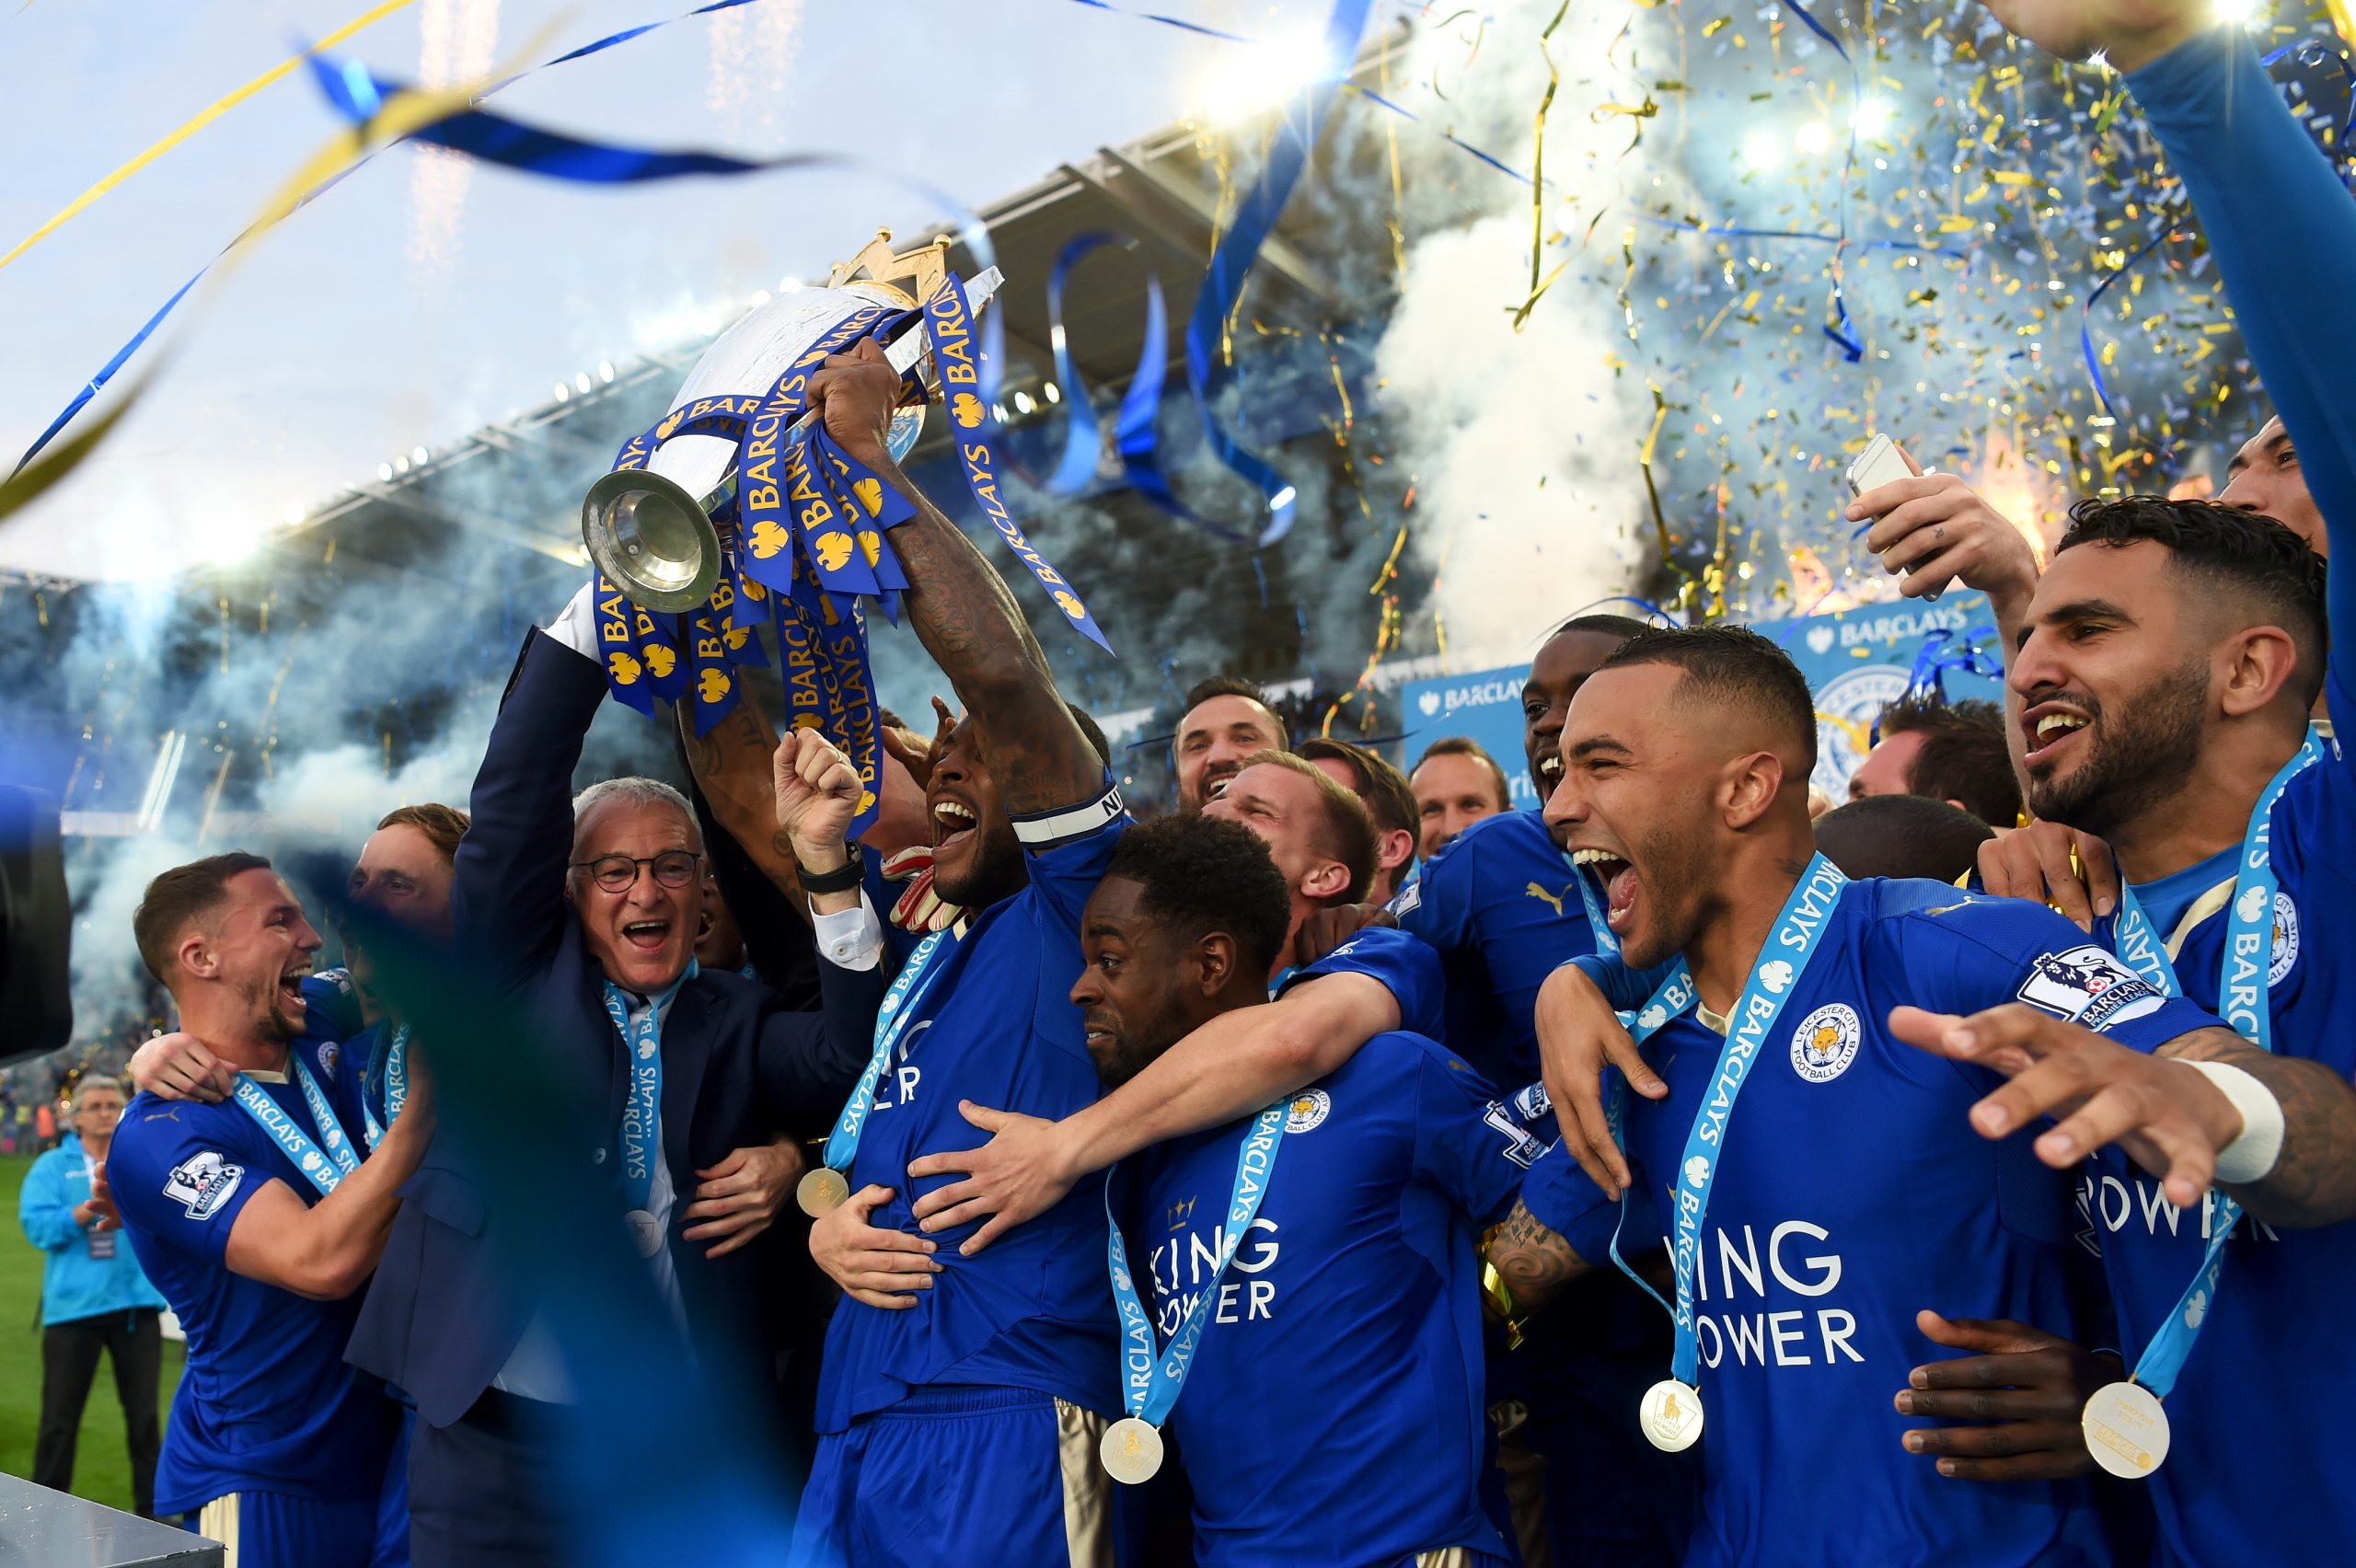 The Analyst’s Premier League History Part IV: Variety Is the Spice of Life